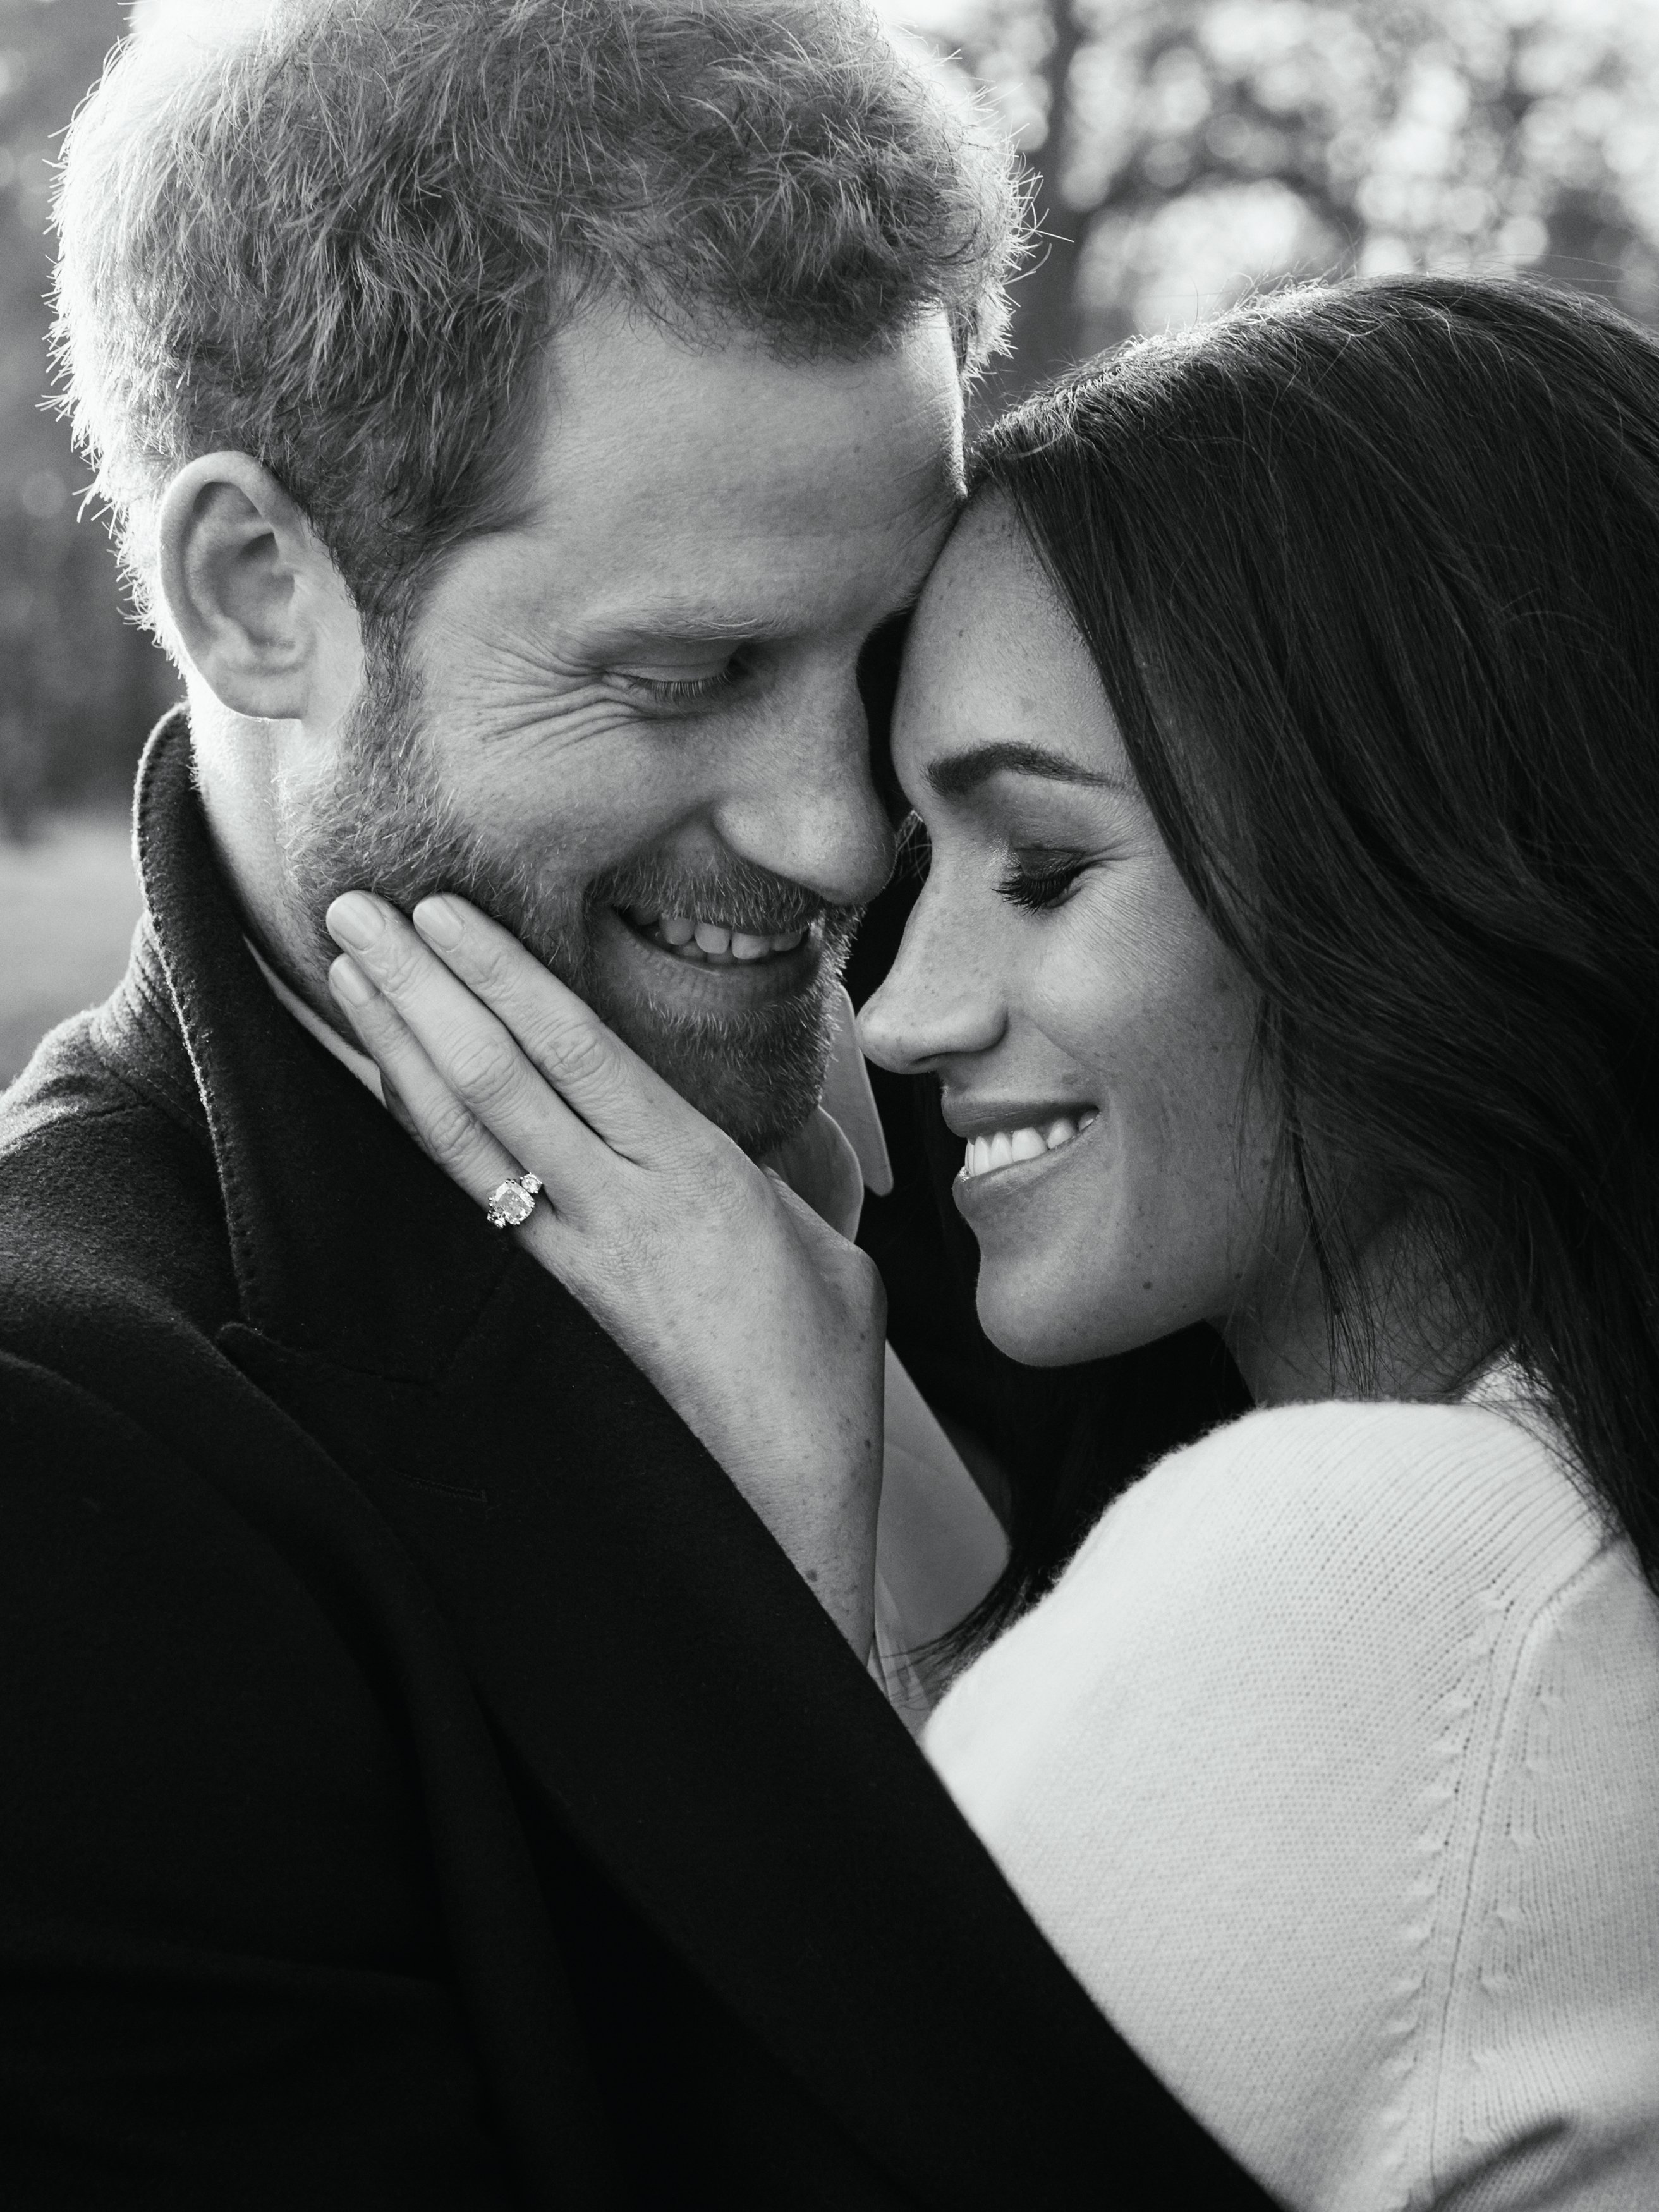 Prince Harry and Meghan Markle pose for their one of two official engagement photos at Frogmore House in December, 2017 in Windsor, United Kingdom | Photo: Getty Images